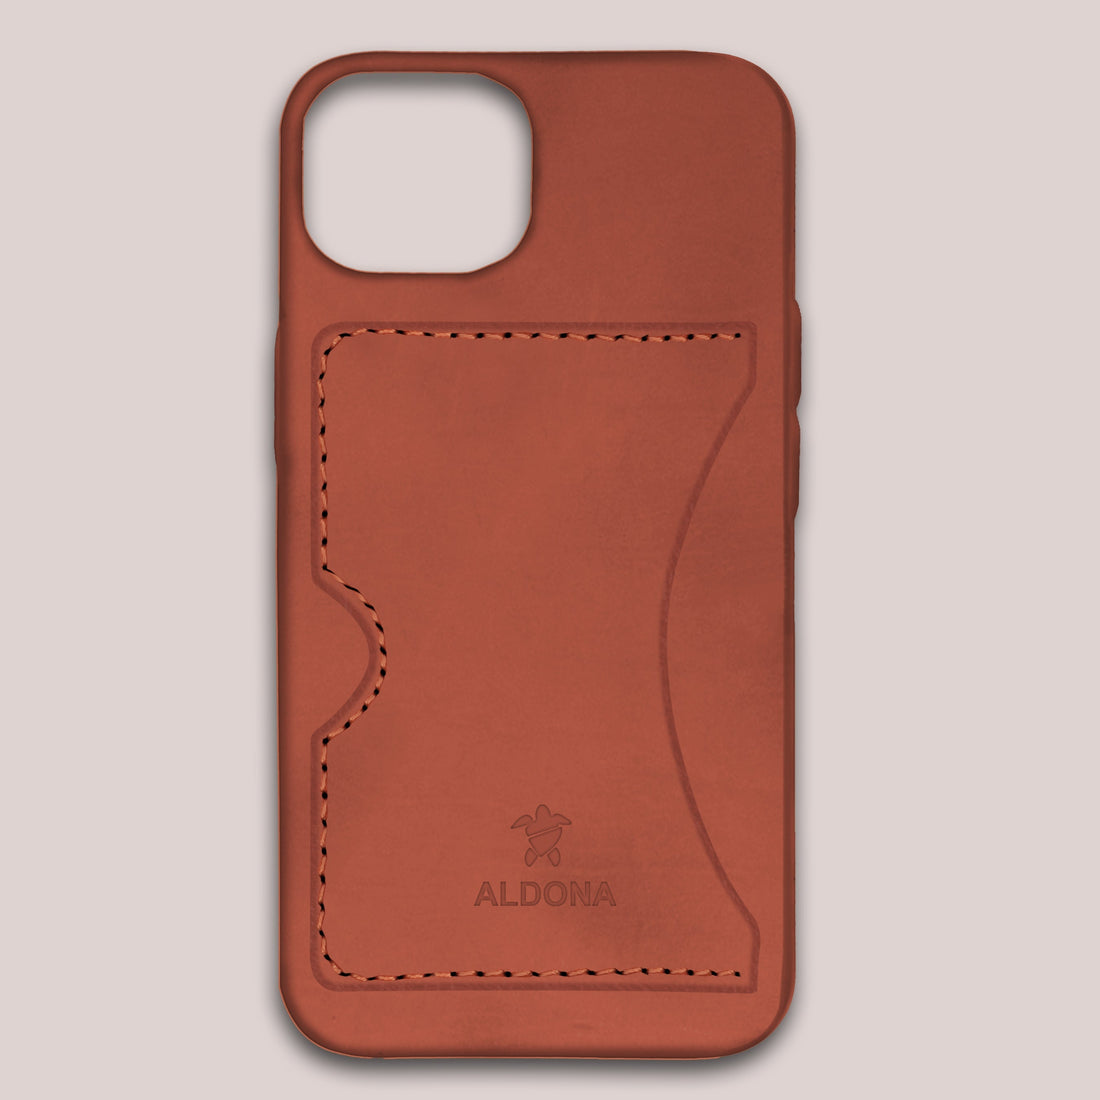 Baxter Card Case for iPhone 12 Pro Max - Cognac